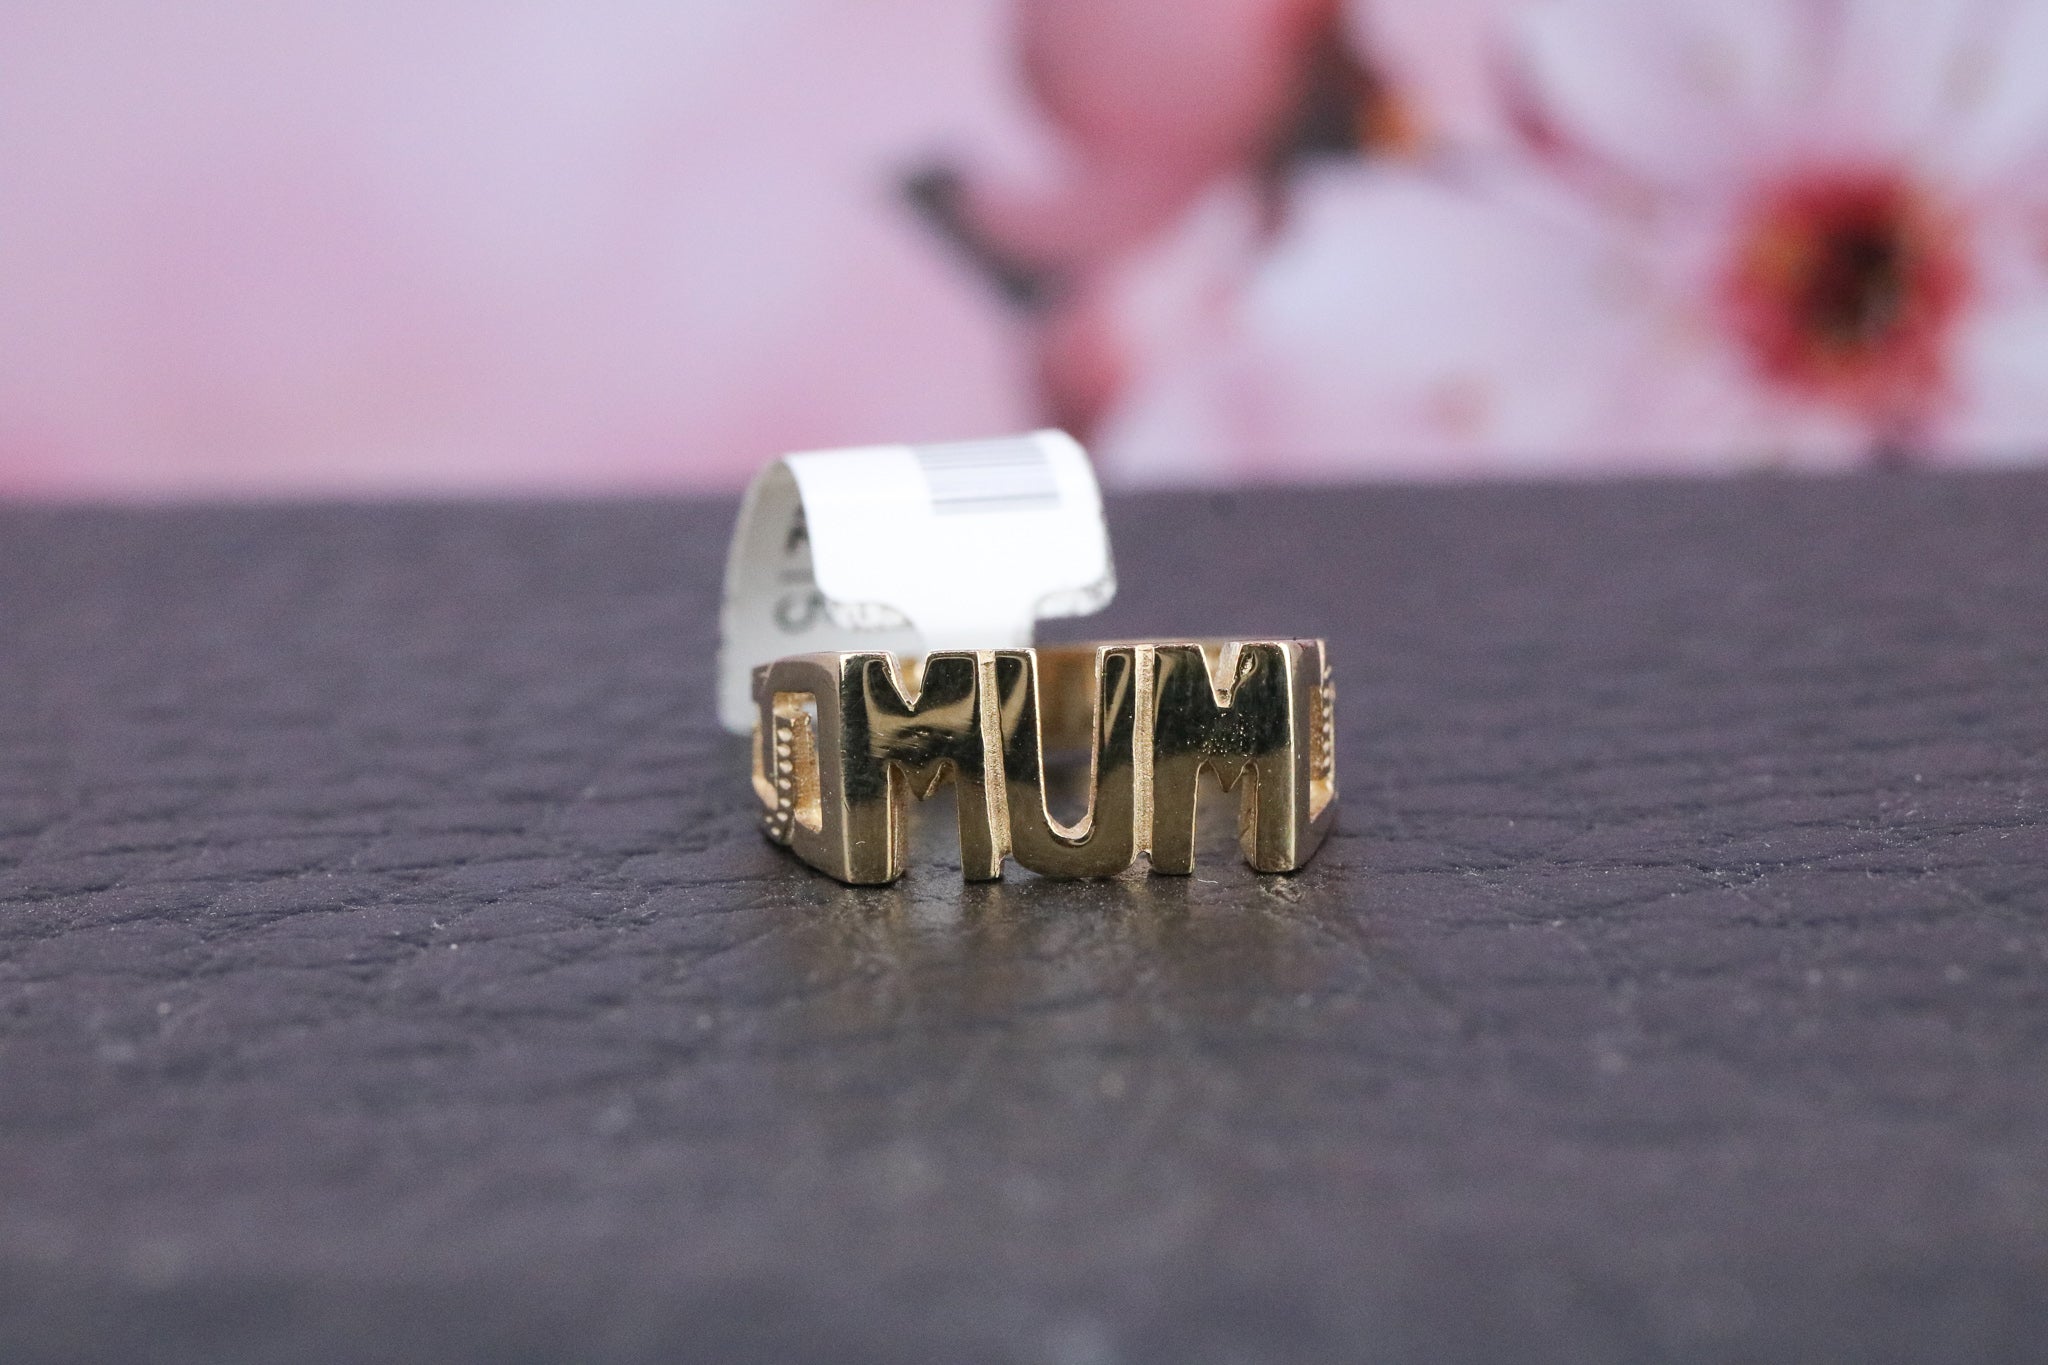 9ct Yellow Gold Ring - CO1415 - Hallmark Jewellers Formby & The Jewellers Bench Widnes